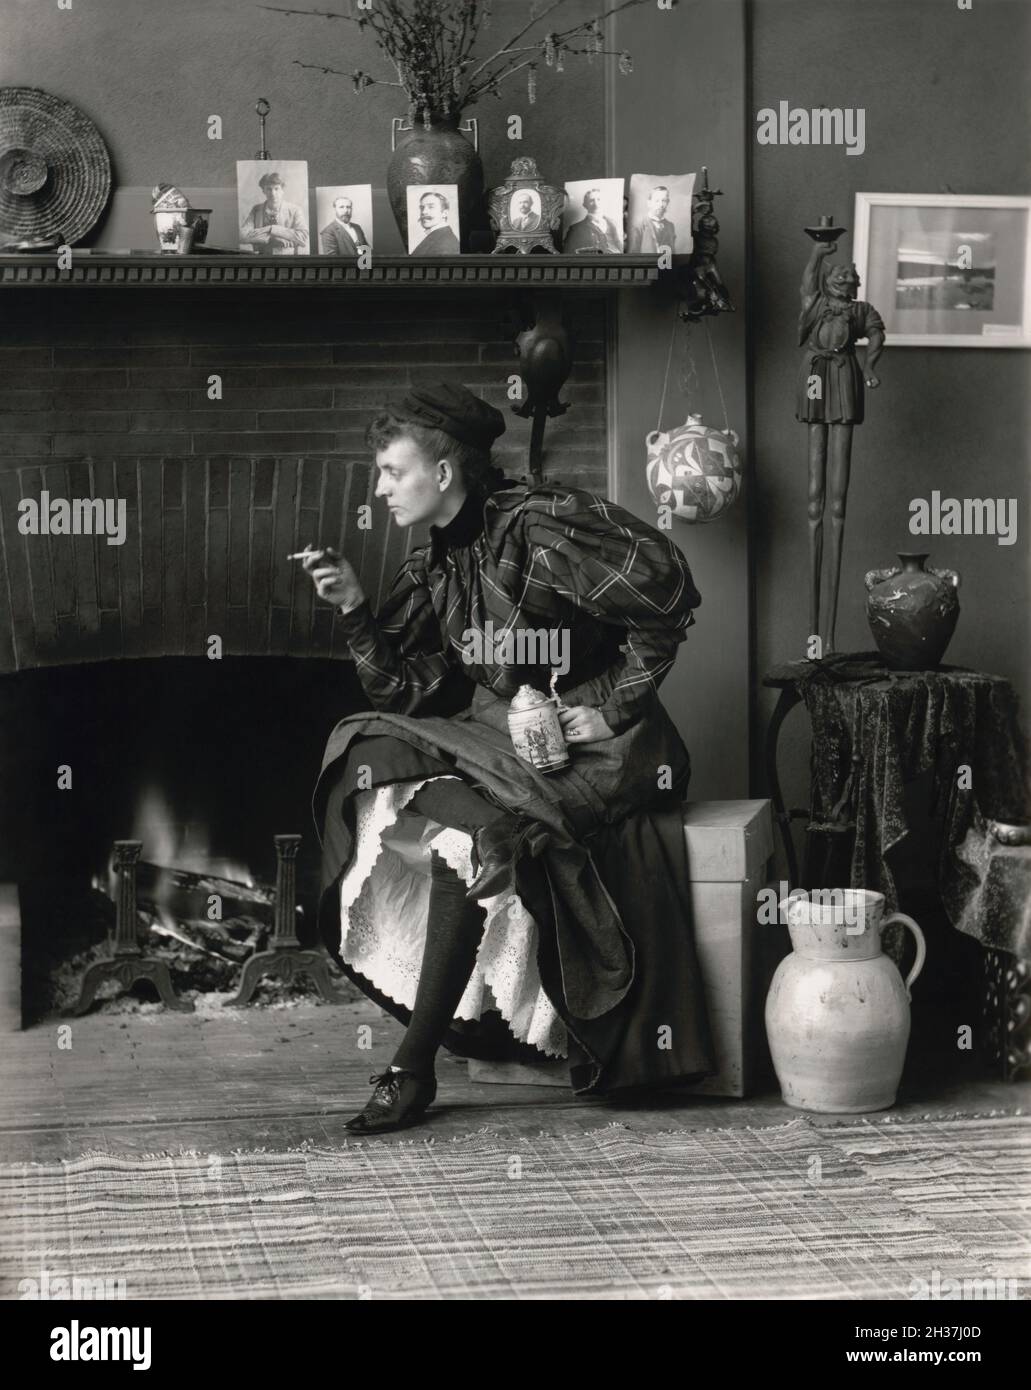 Frances Benjamin Johnston- Self Portrait as New Woman seated in front of fireplace, holding cigarette in one hand and a beer stein in the other hand. Stock Photo